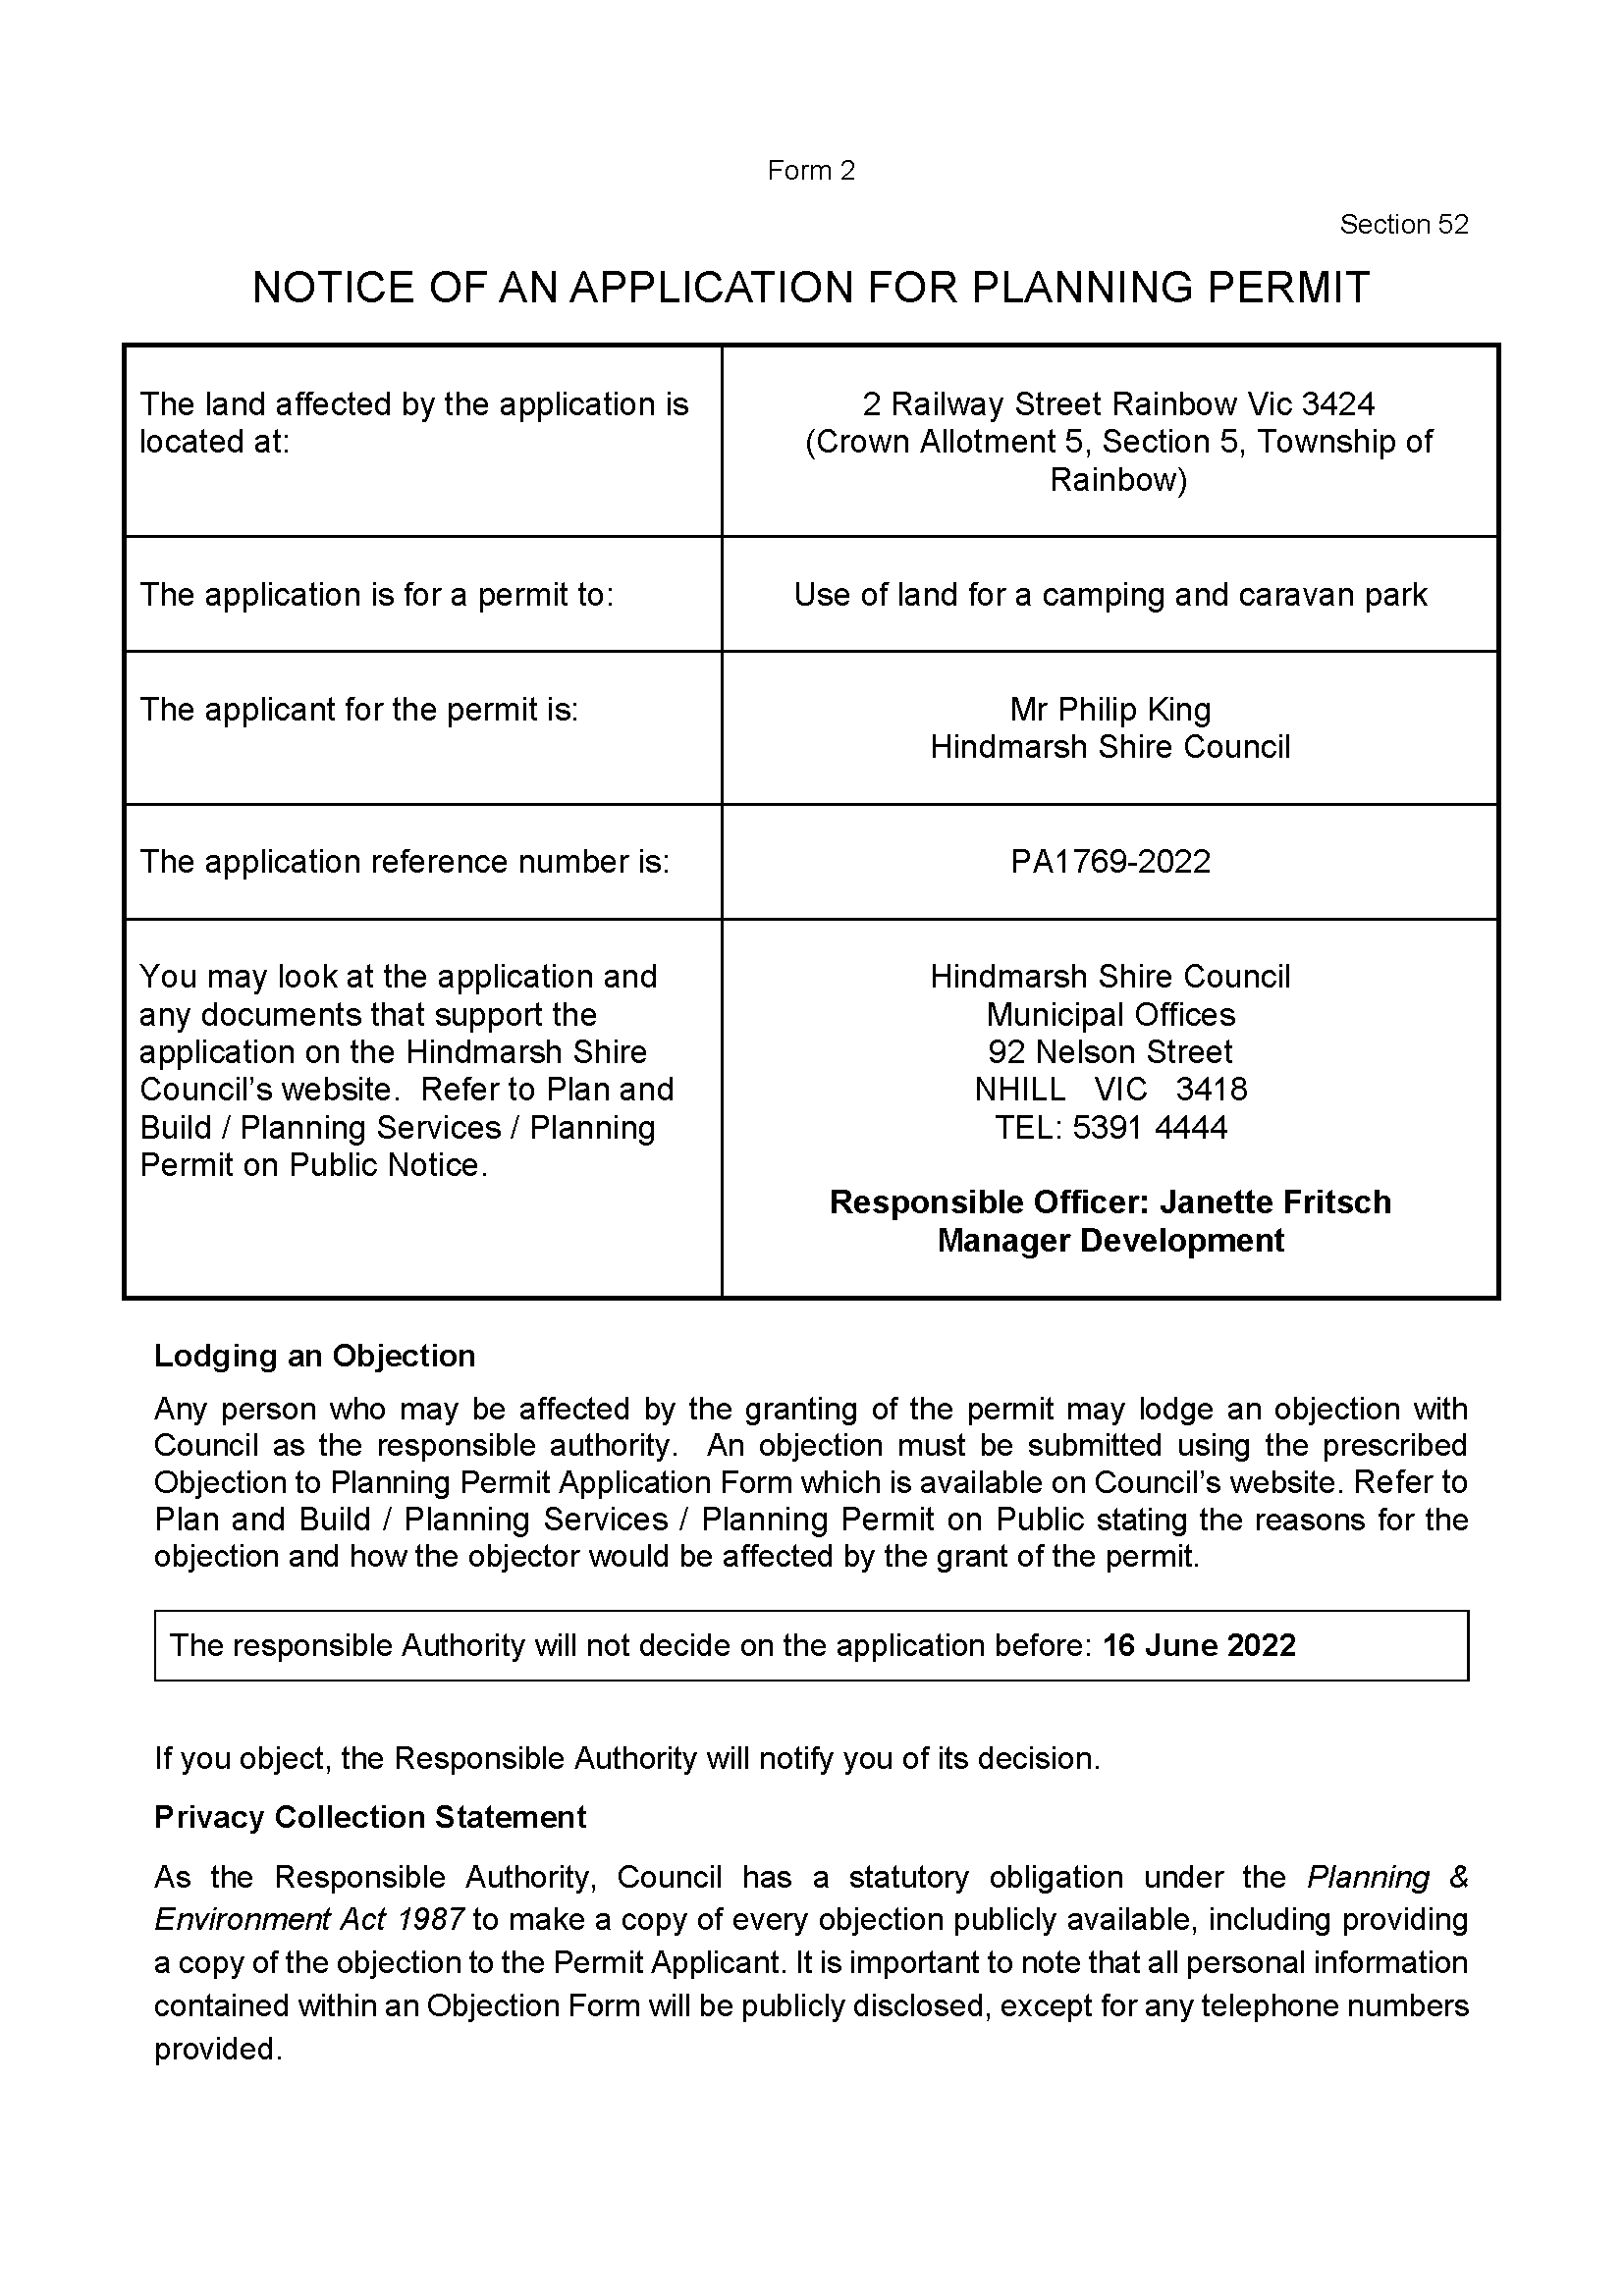 2022_06_02 - PA1769-2022 ADVERT - Form 2.png